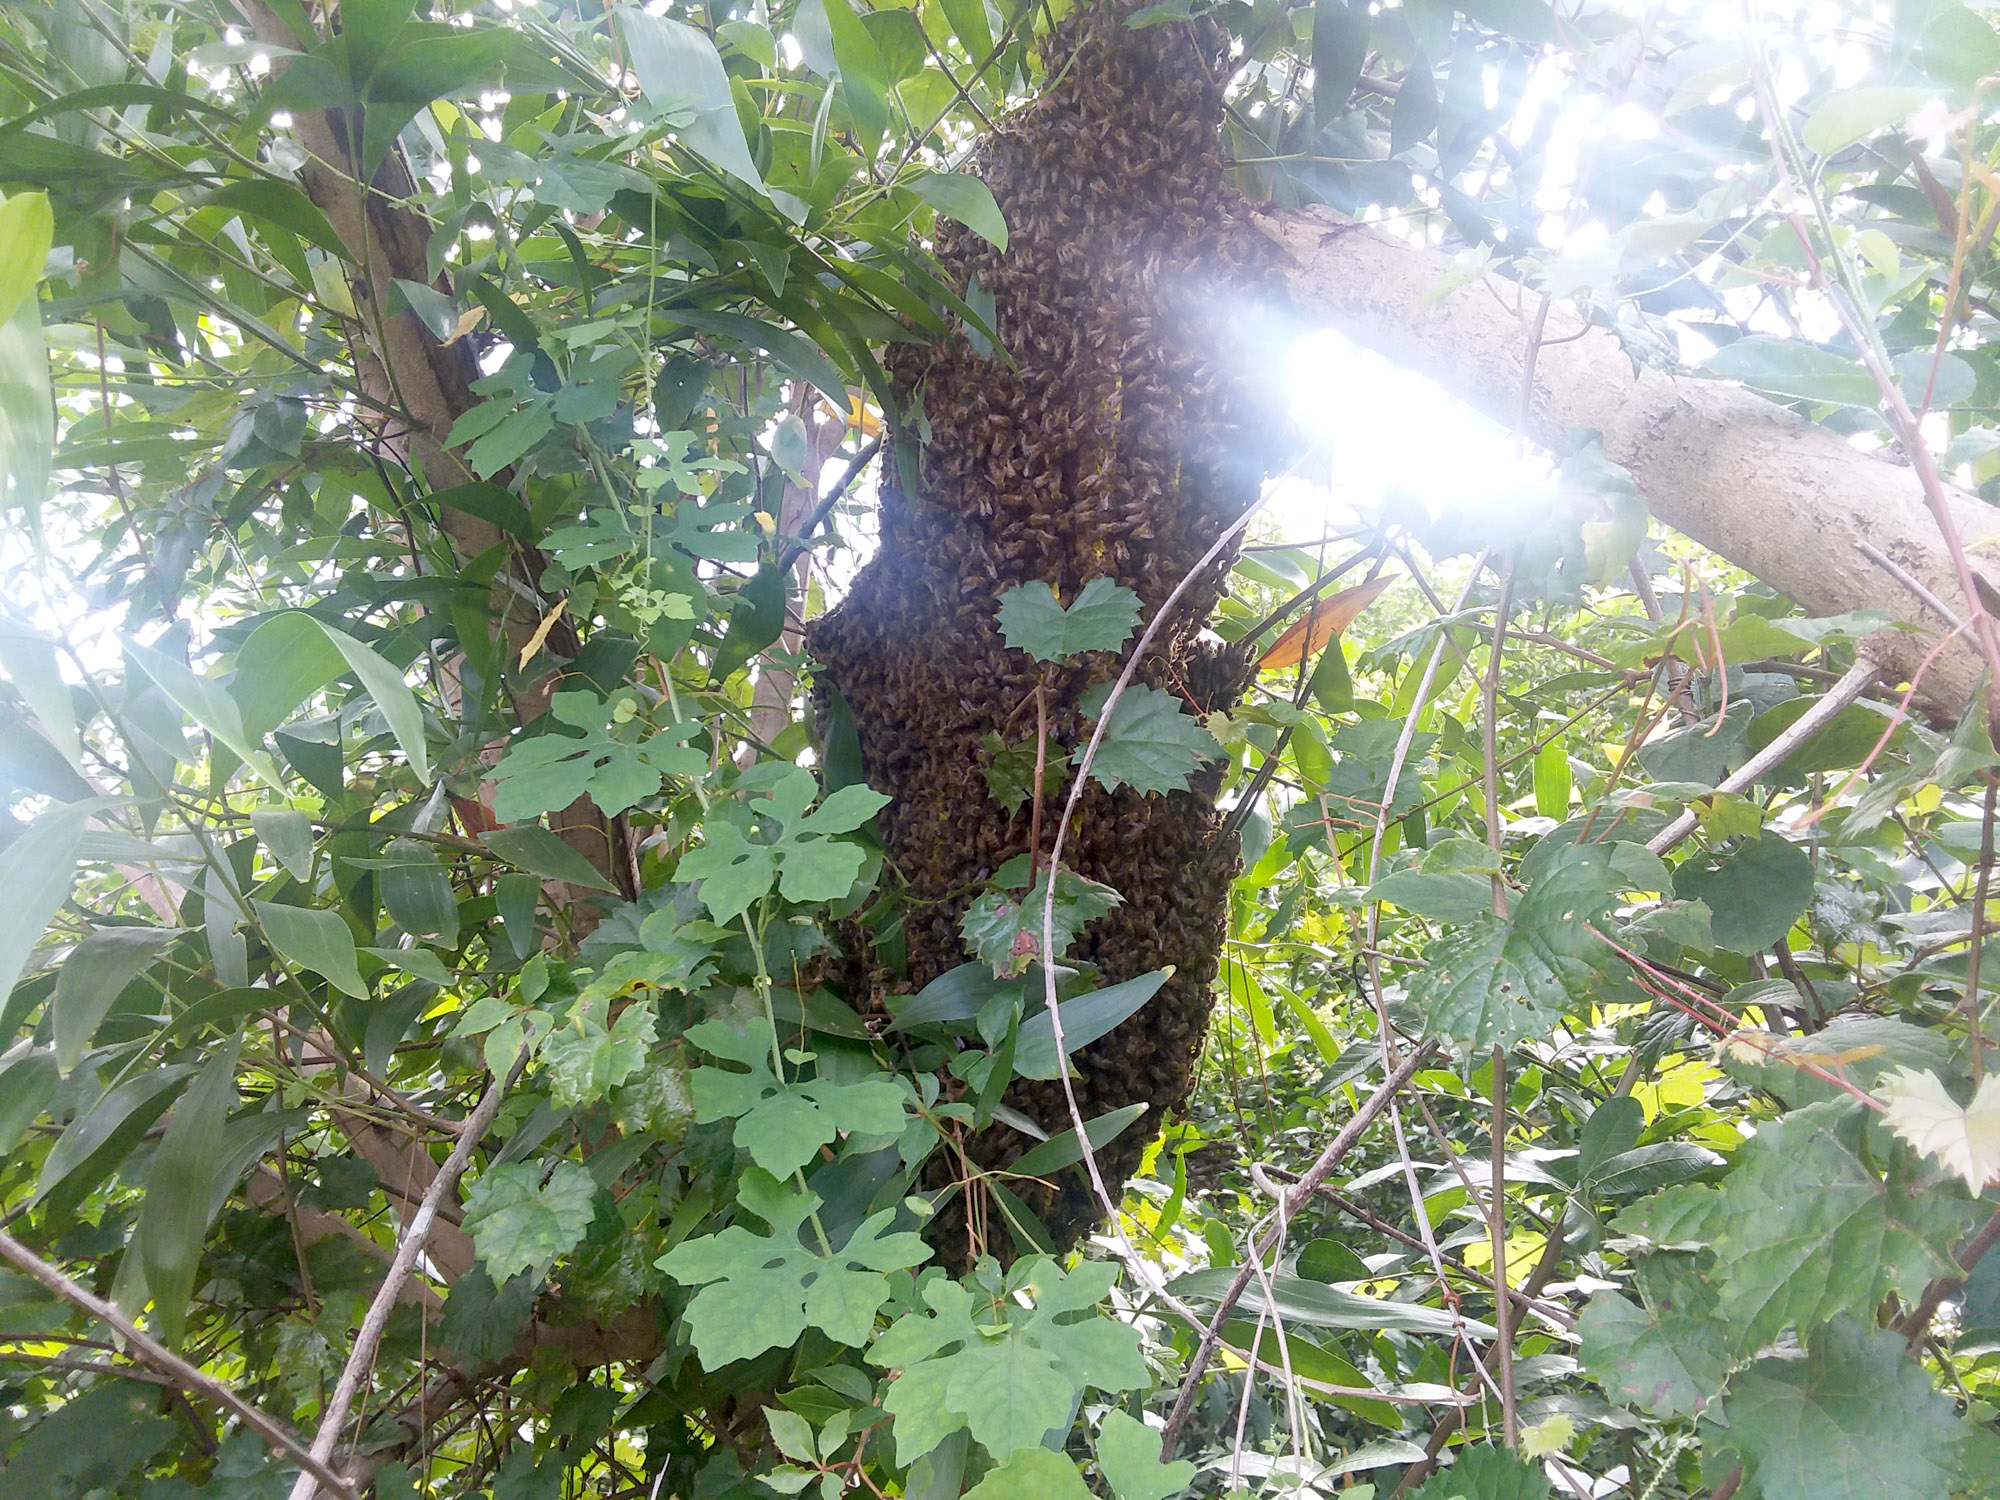 Good size hive in tree behind our apiary.